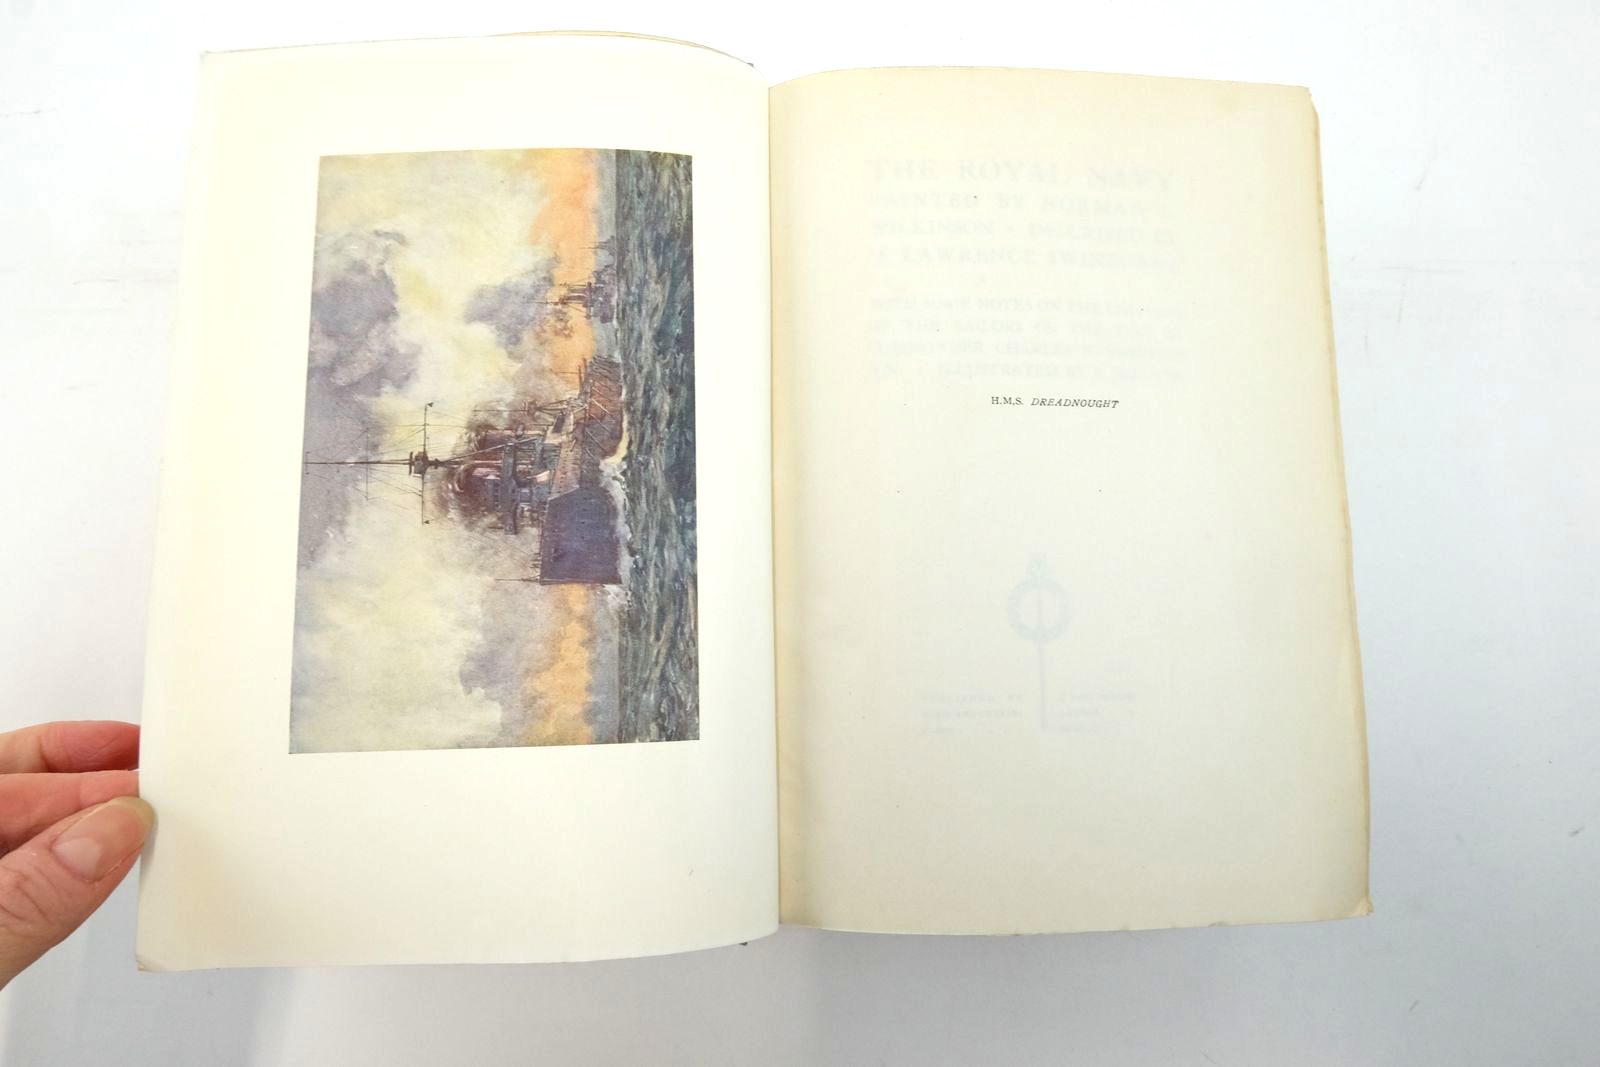 Photo of THE ROYAL NAVY written by Swinburne, H. Lawrence illustrated by Wilkinson, Norman
Jellicoe, J. published by Adam & Charles Black (STOCK CODE: 2137509)  for sale by Stella & Rose's Books